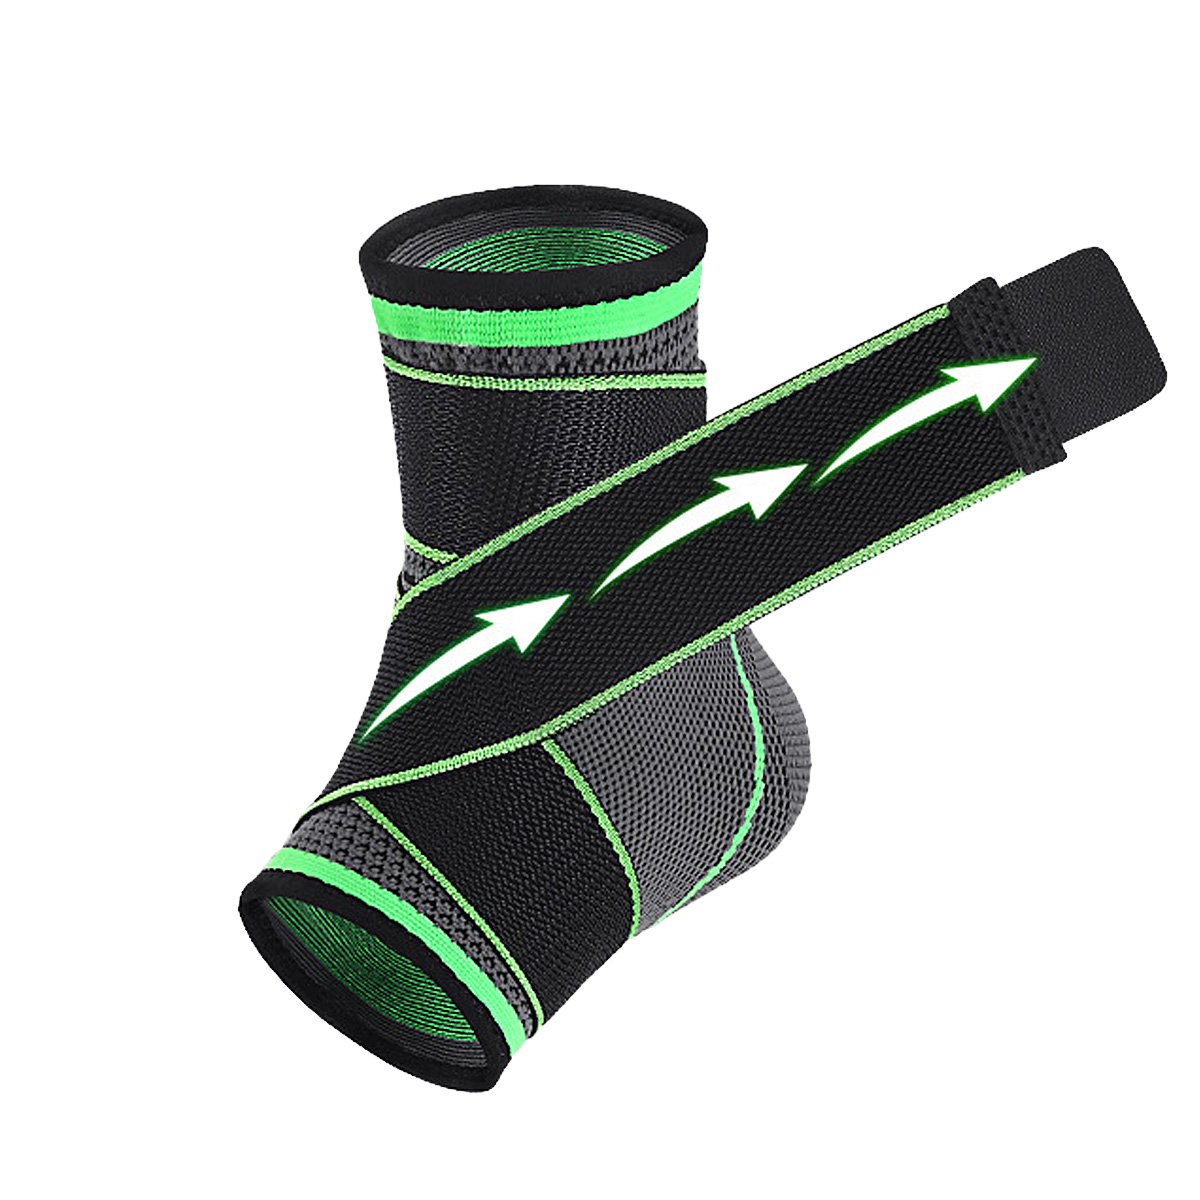 Elastic Green Ankle Support Sleeve-Strap Design